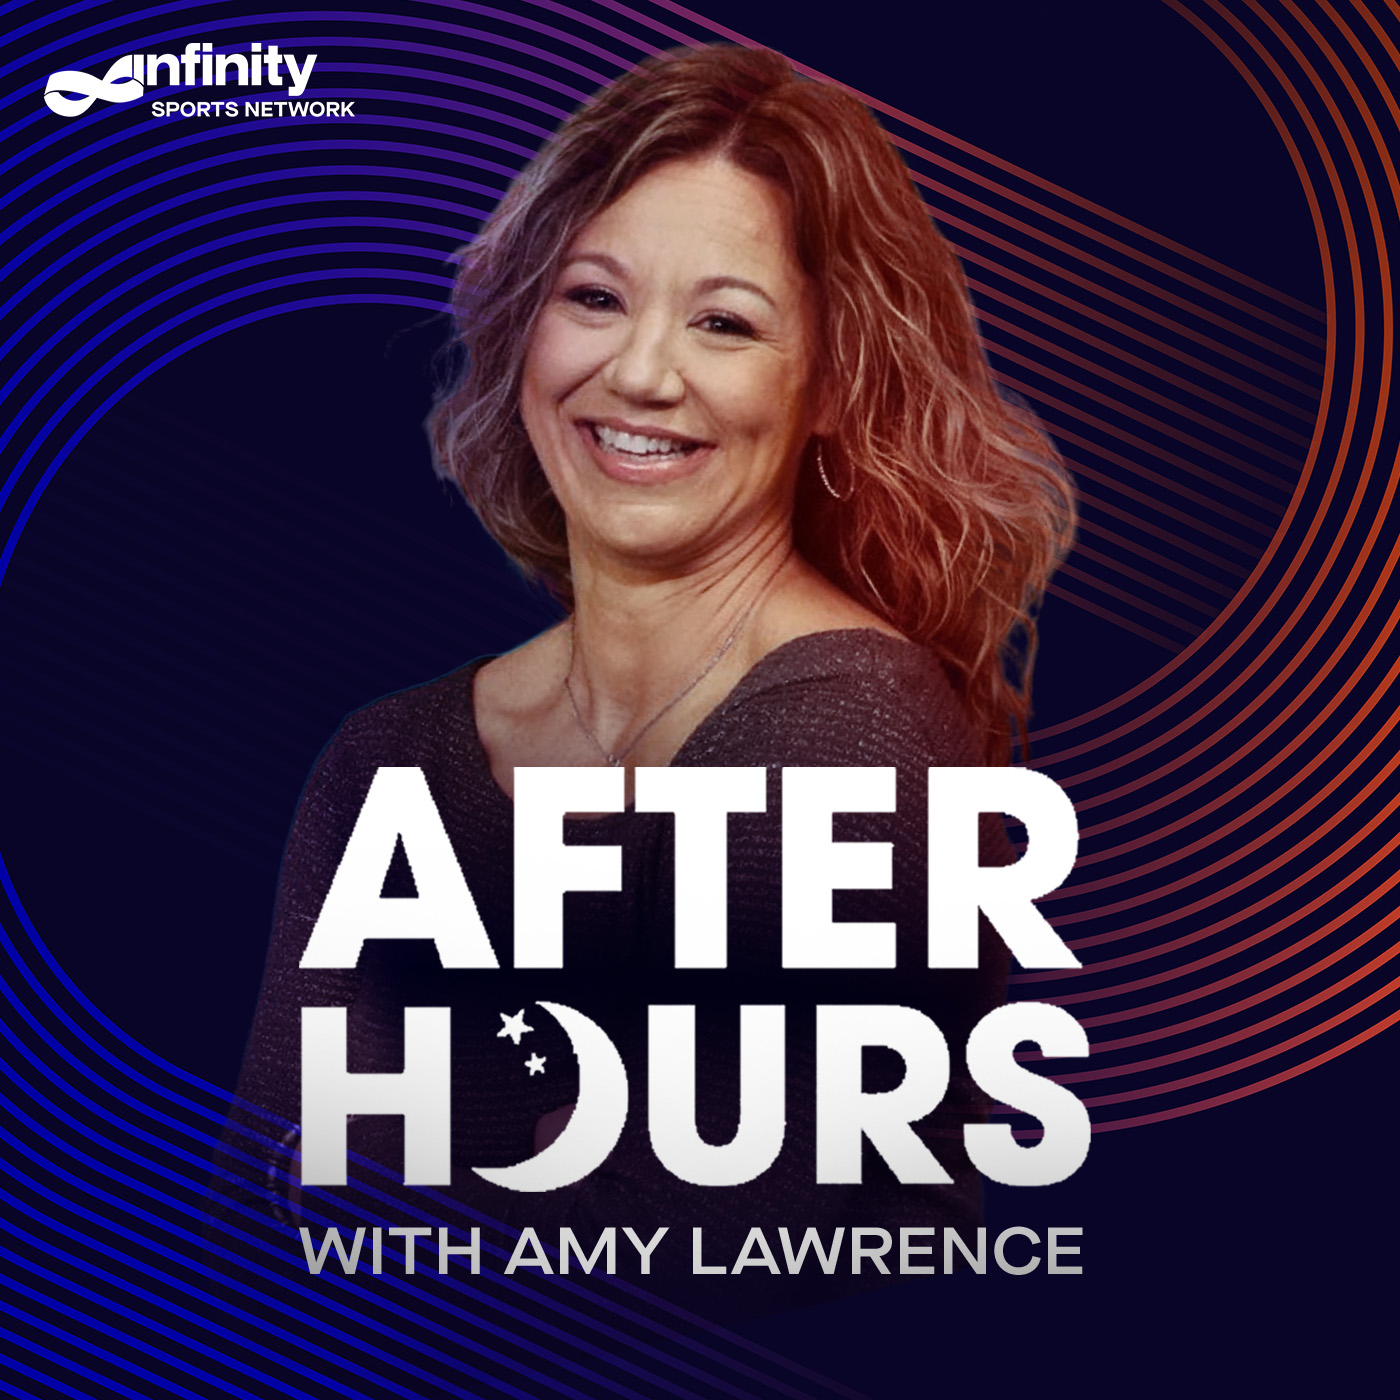 8-25-21 After Hours with Amy Lawrence PODCAST: Hour 2